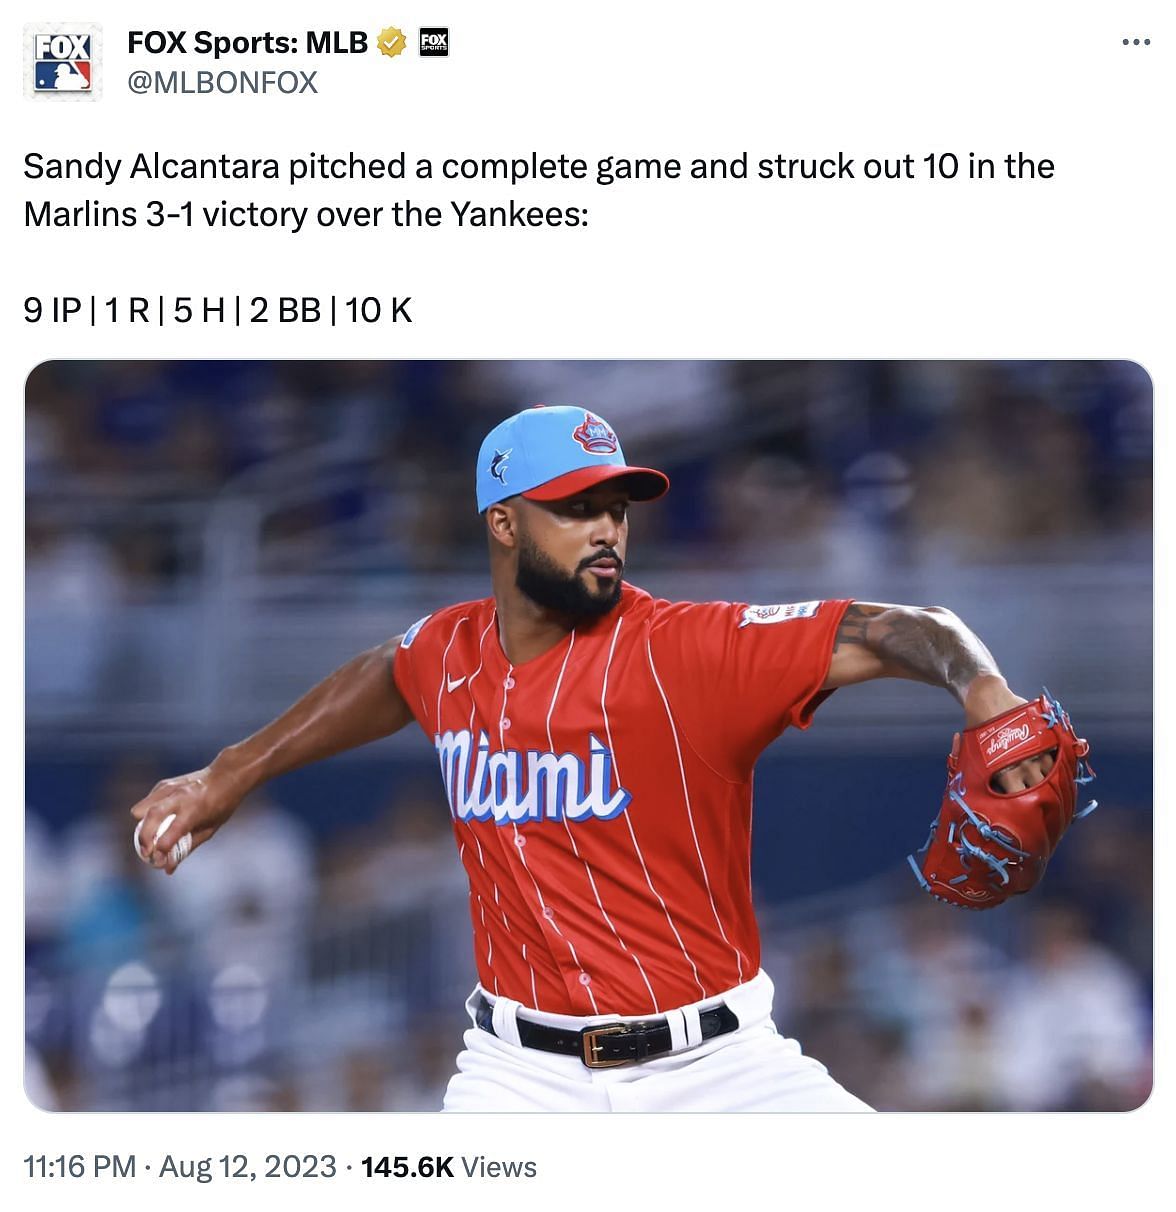 &quot;Sandy Alcantara pitched a complete game and struck out 10 in the Marlins 3-1 victory over the Yankees: 9 IP | 1 R | 5 H | 2 BB | 10 K&quot; - FOX Sports: MLB